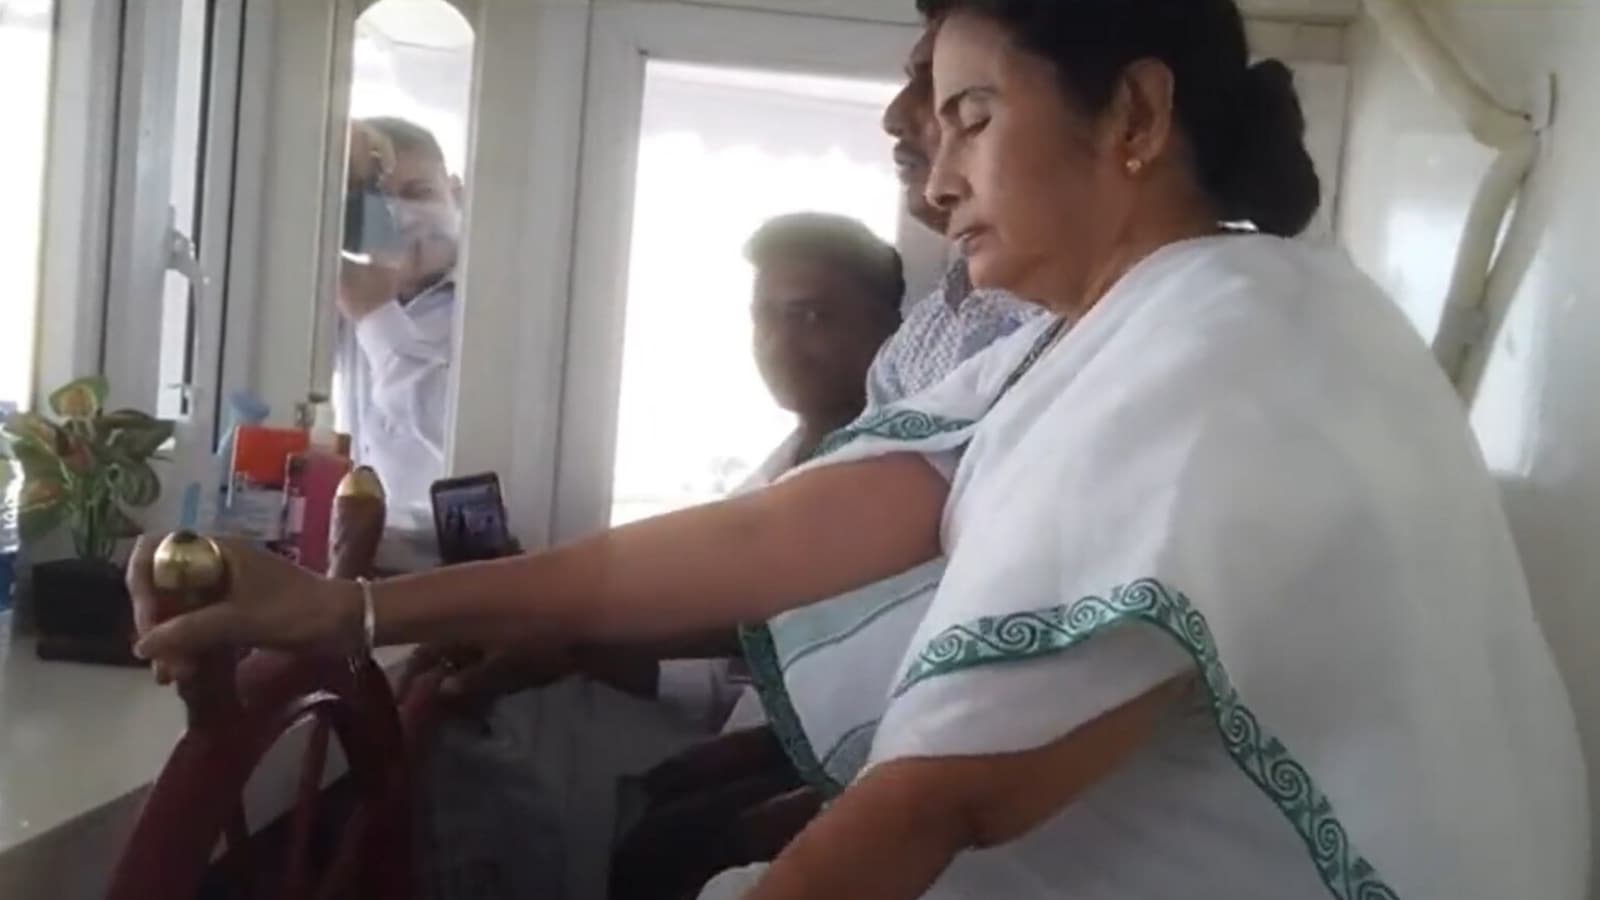 Behind the wheels, Mamata visits villages of North 24 Parganas on a boat |  Watch | Latest News India - Hindustan Times